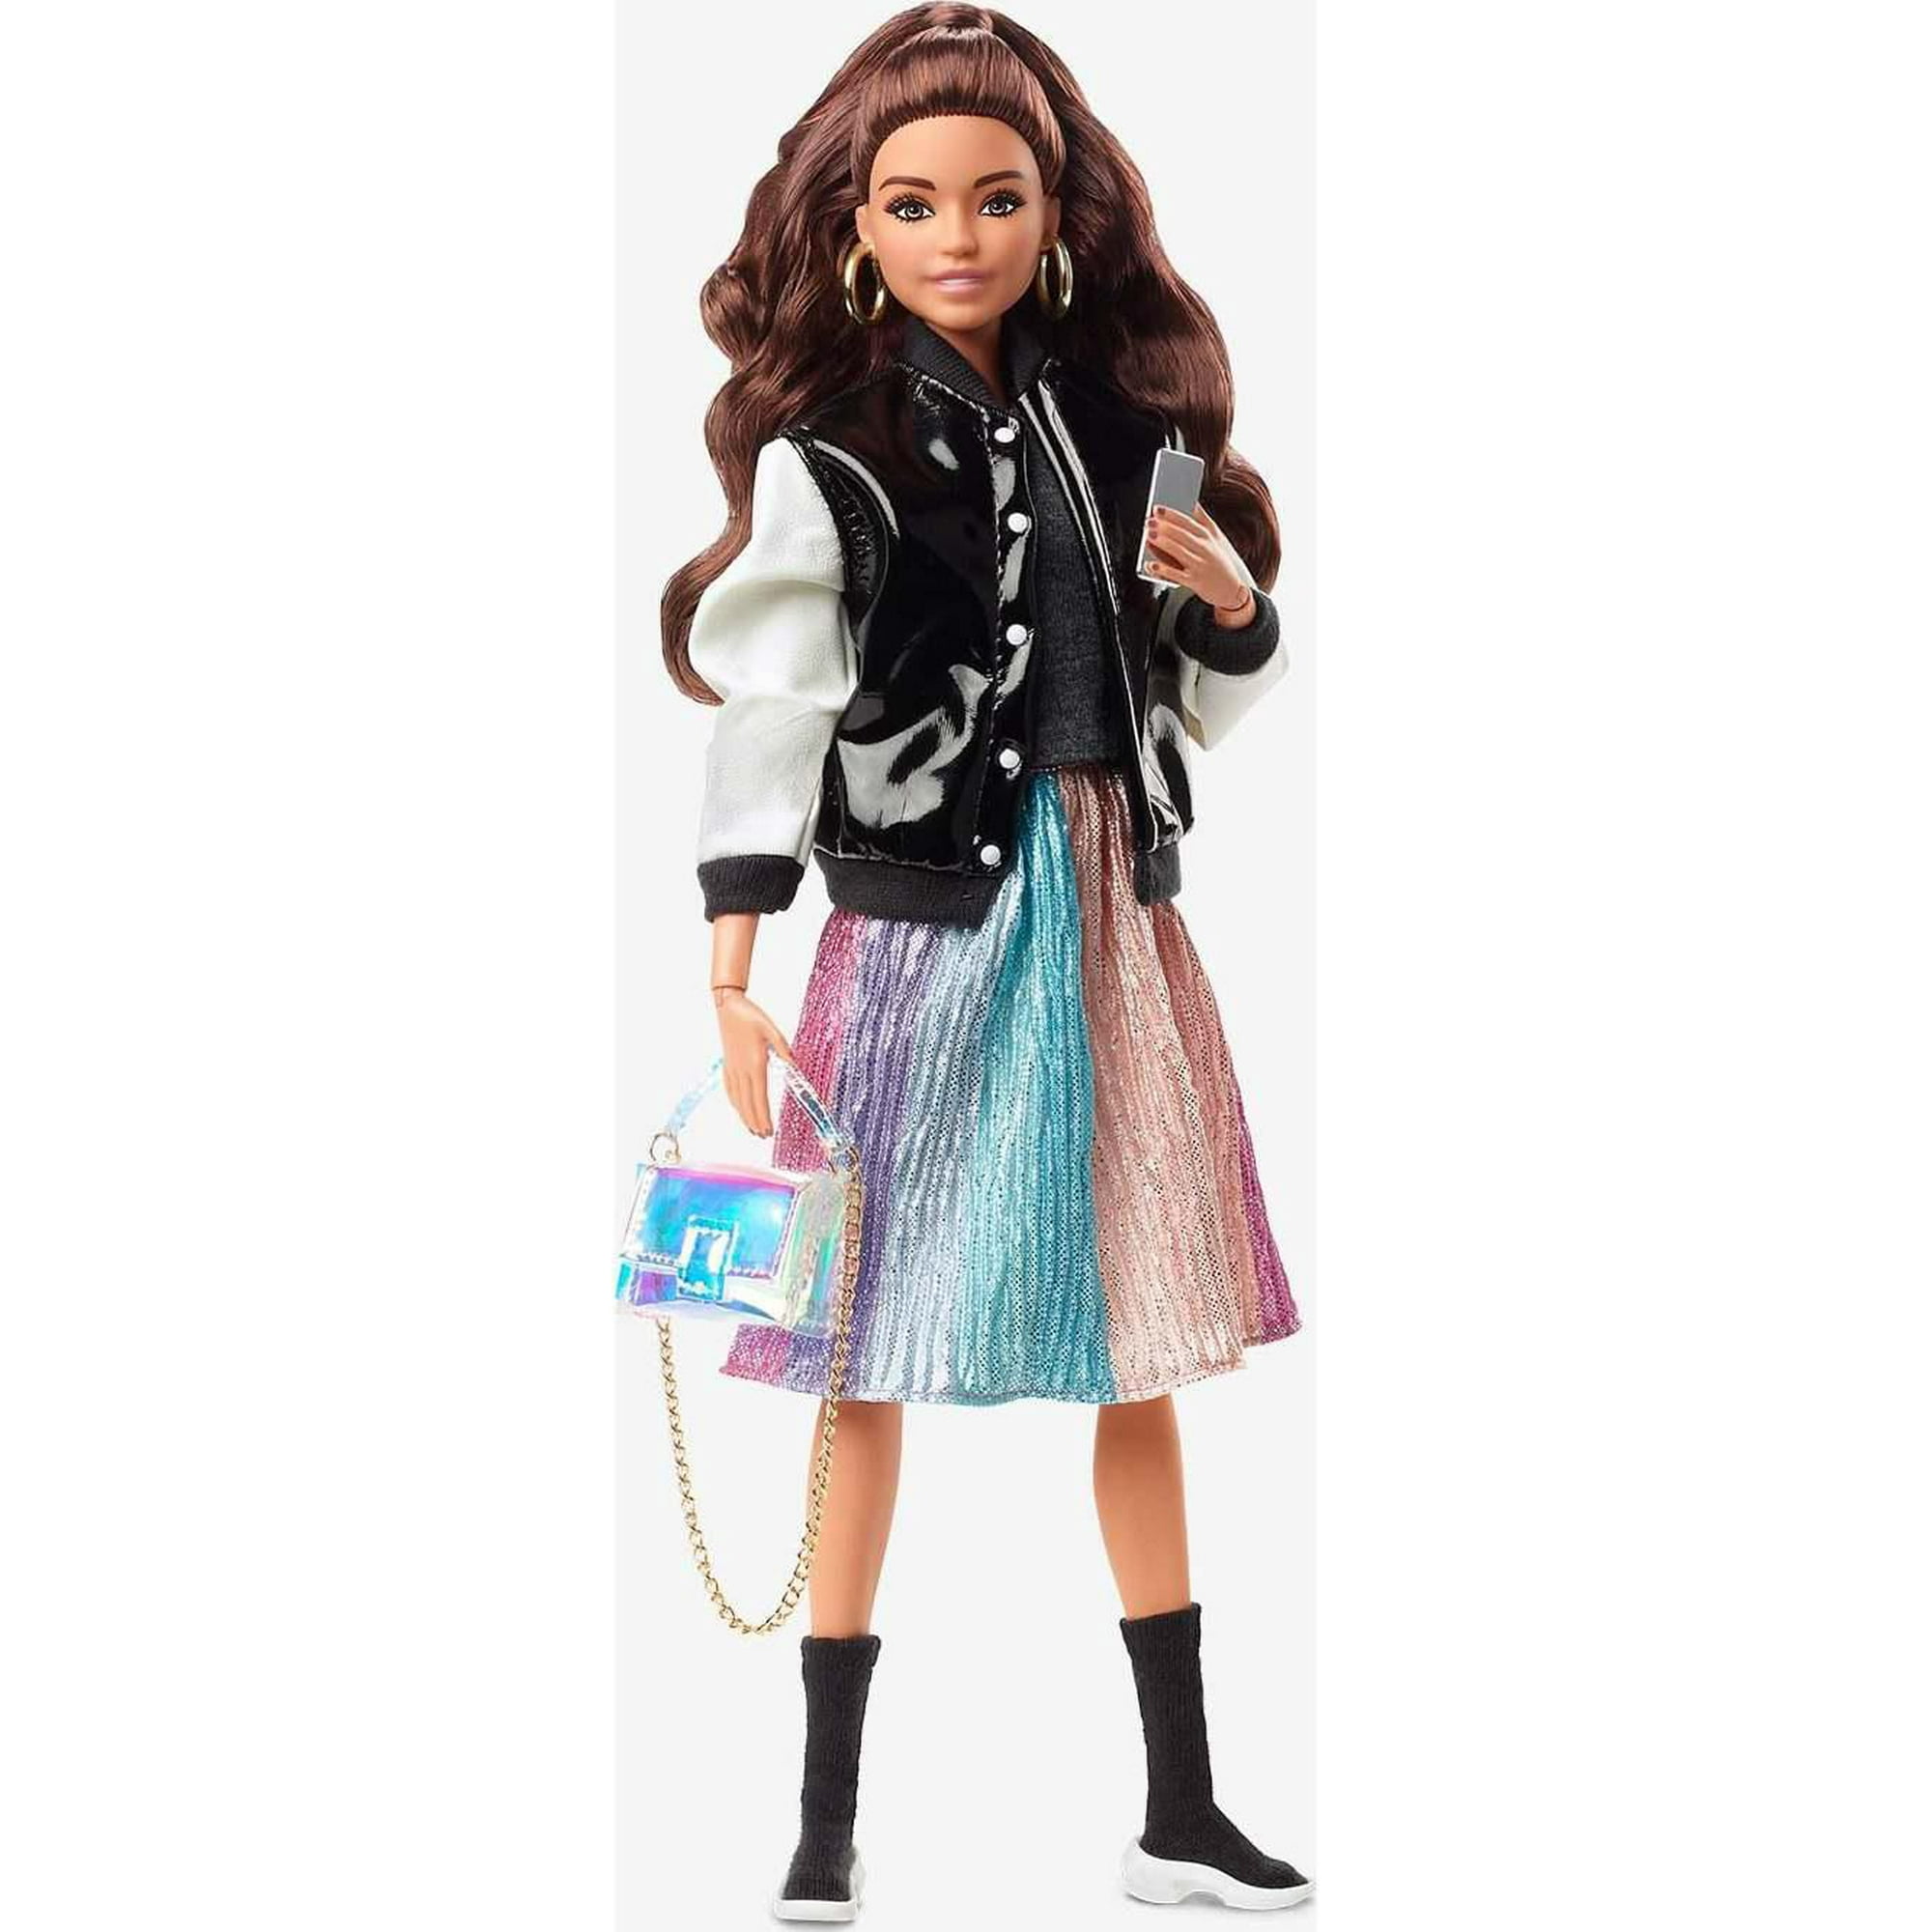 Barbie Signature @BarbieStyle Fully Posable Fashion Doll (Brunette) with 2  Tops, Skirt, Jeans, Jacket, 2 Pairs of Shoes & Accessories, Gift for